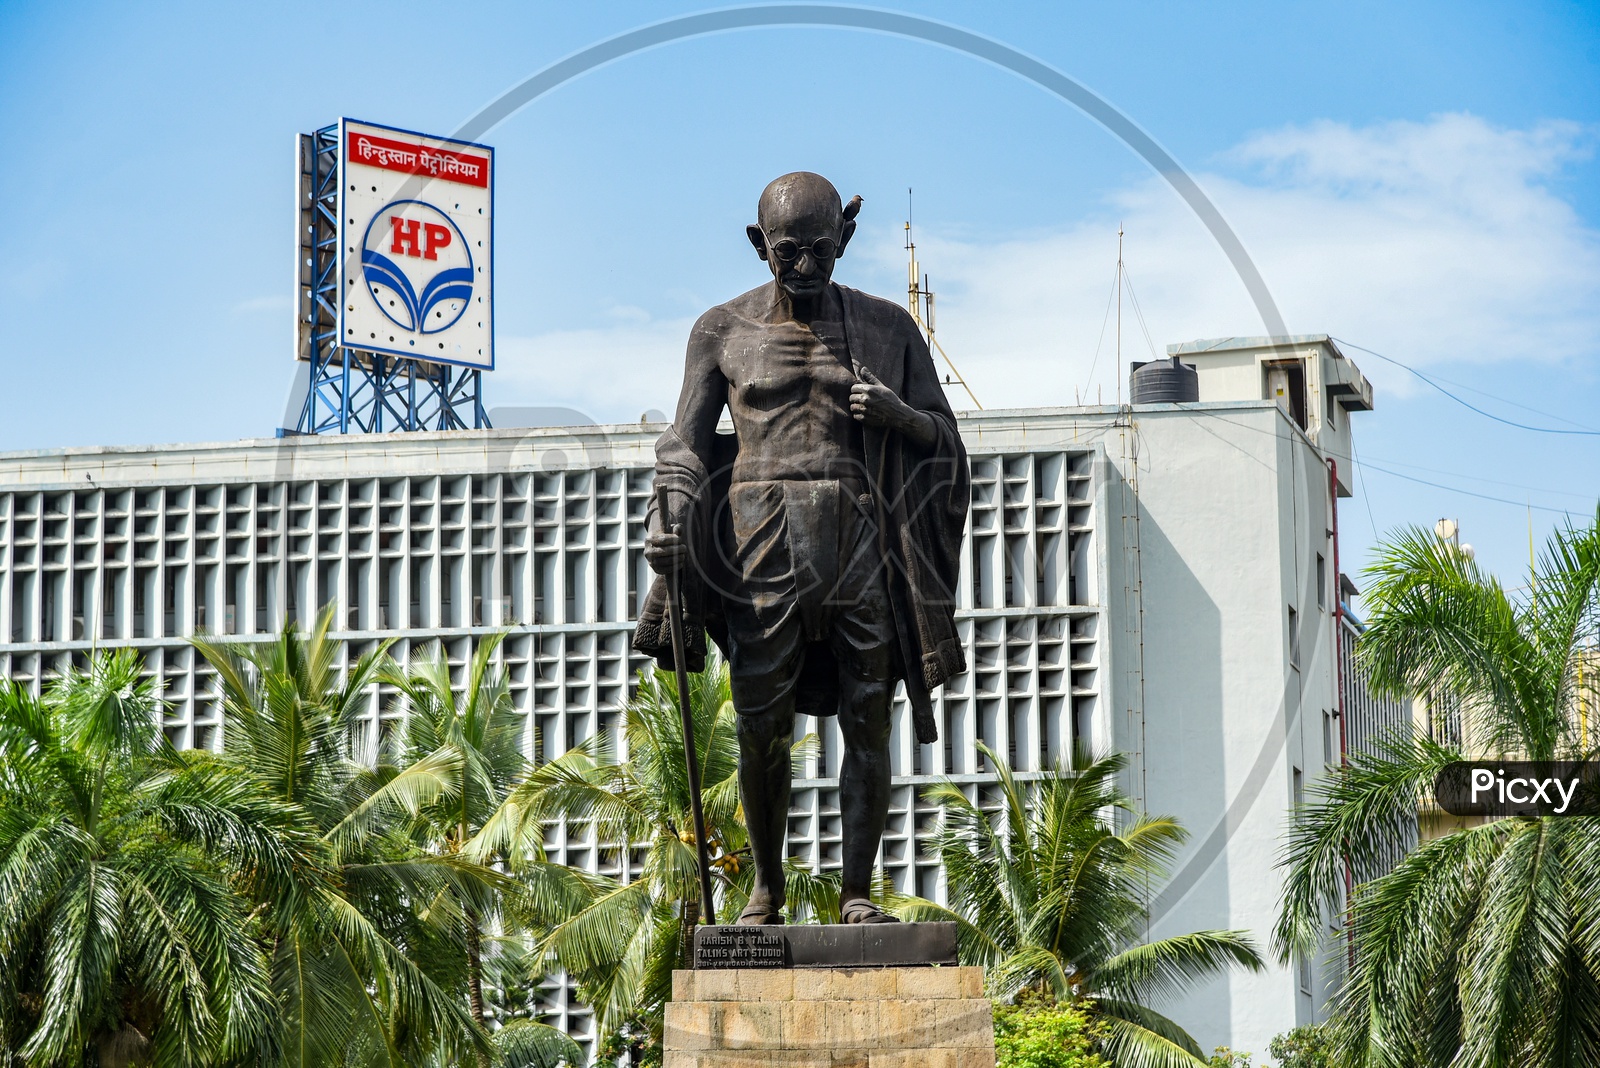 Mahatma Gandhi Statue with Hindustan Petroleum (HP) Building in the bacground